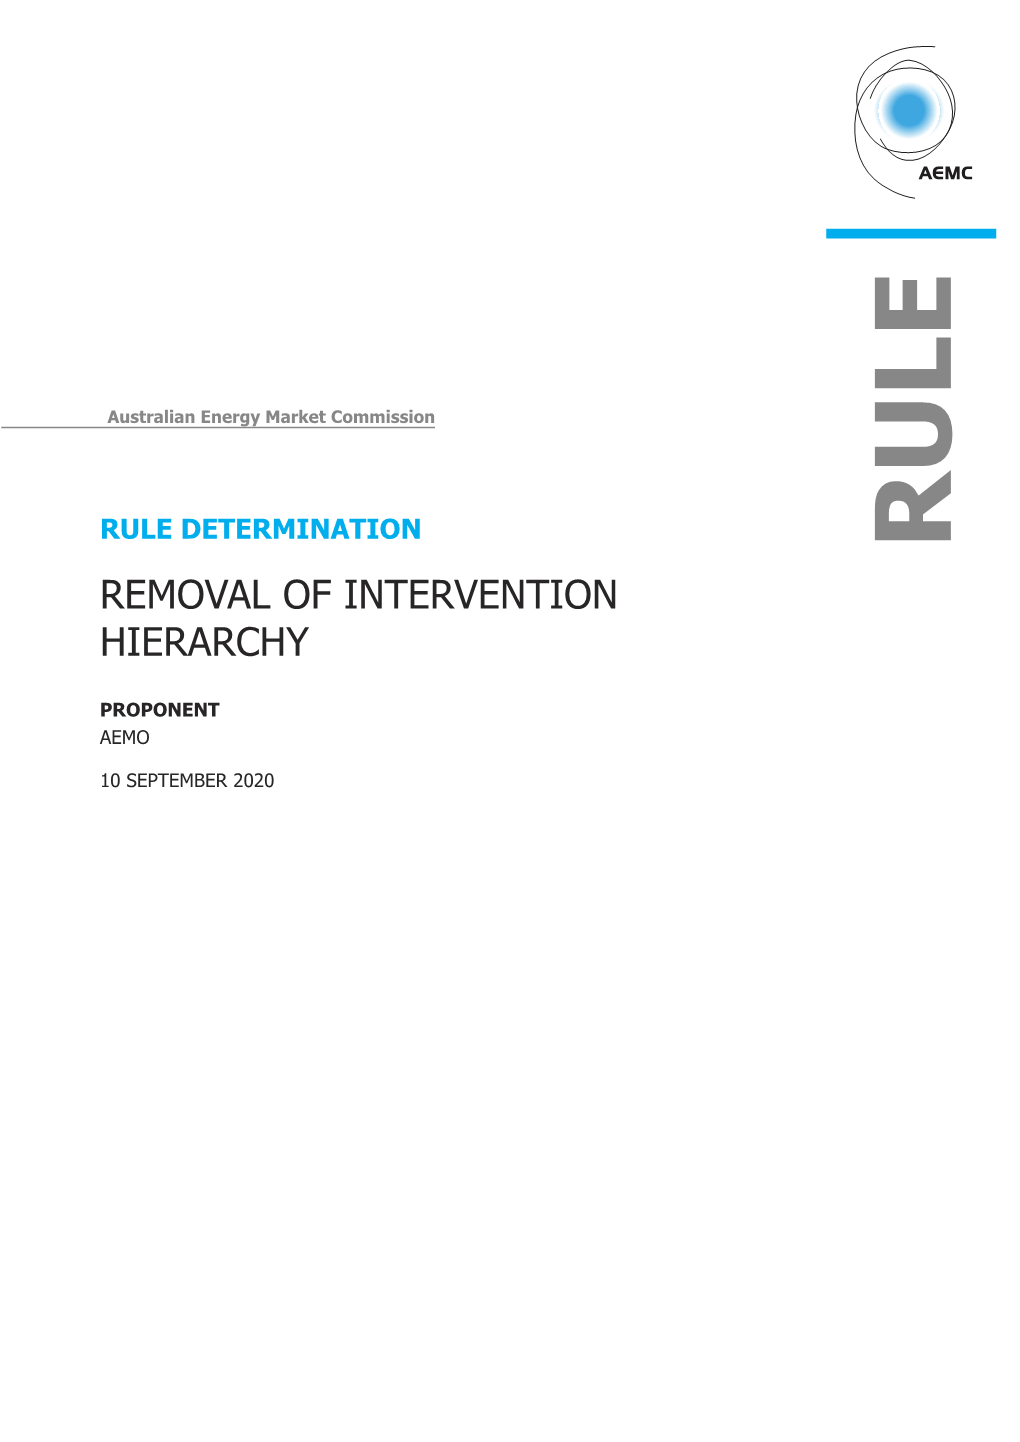 Removal of Intervention Hierarchy